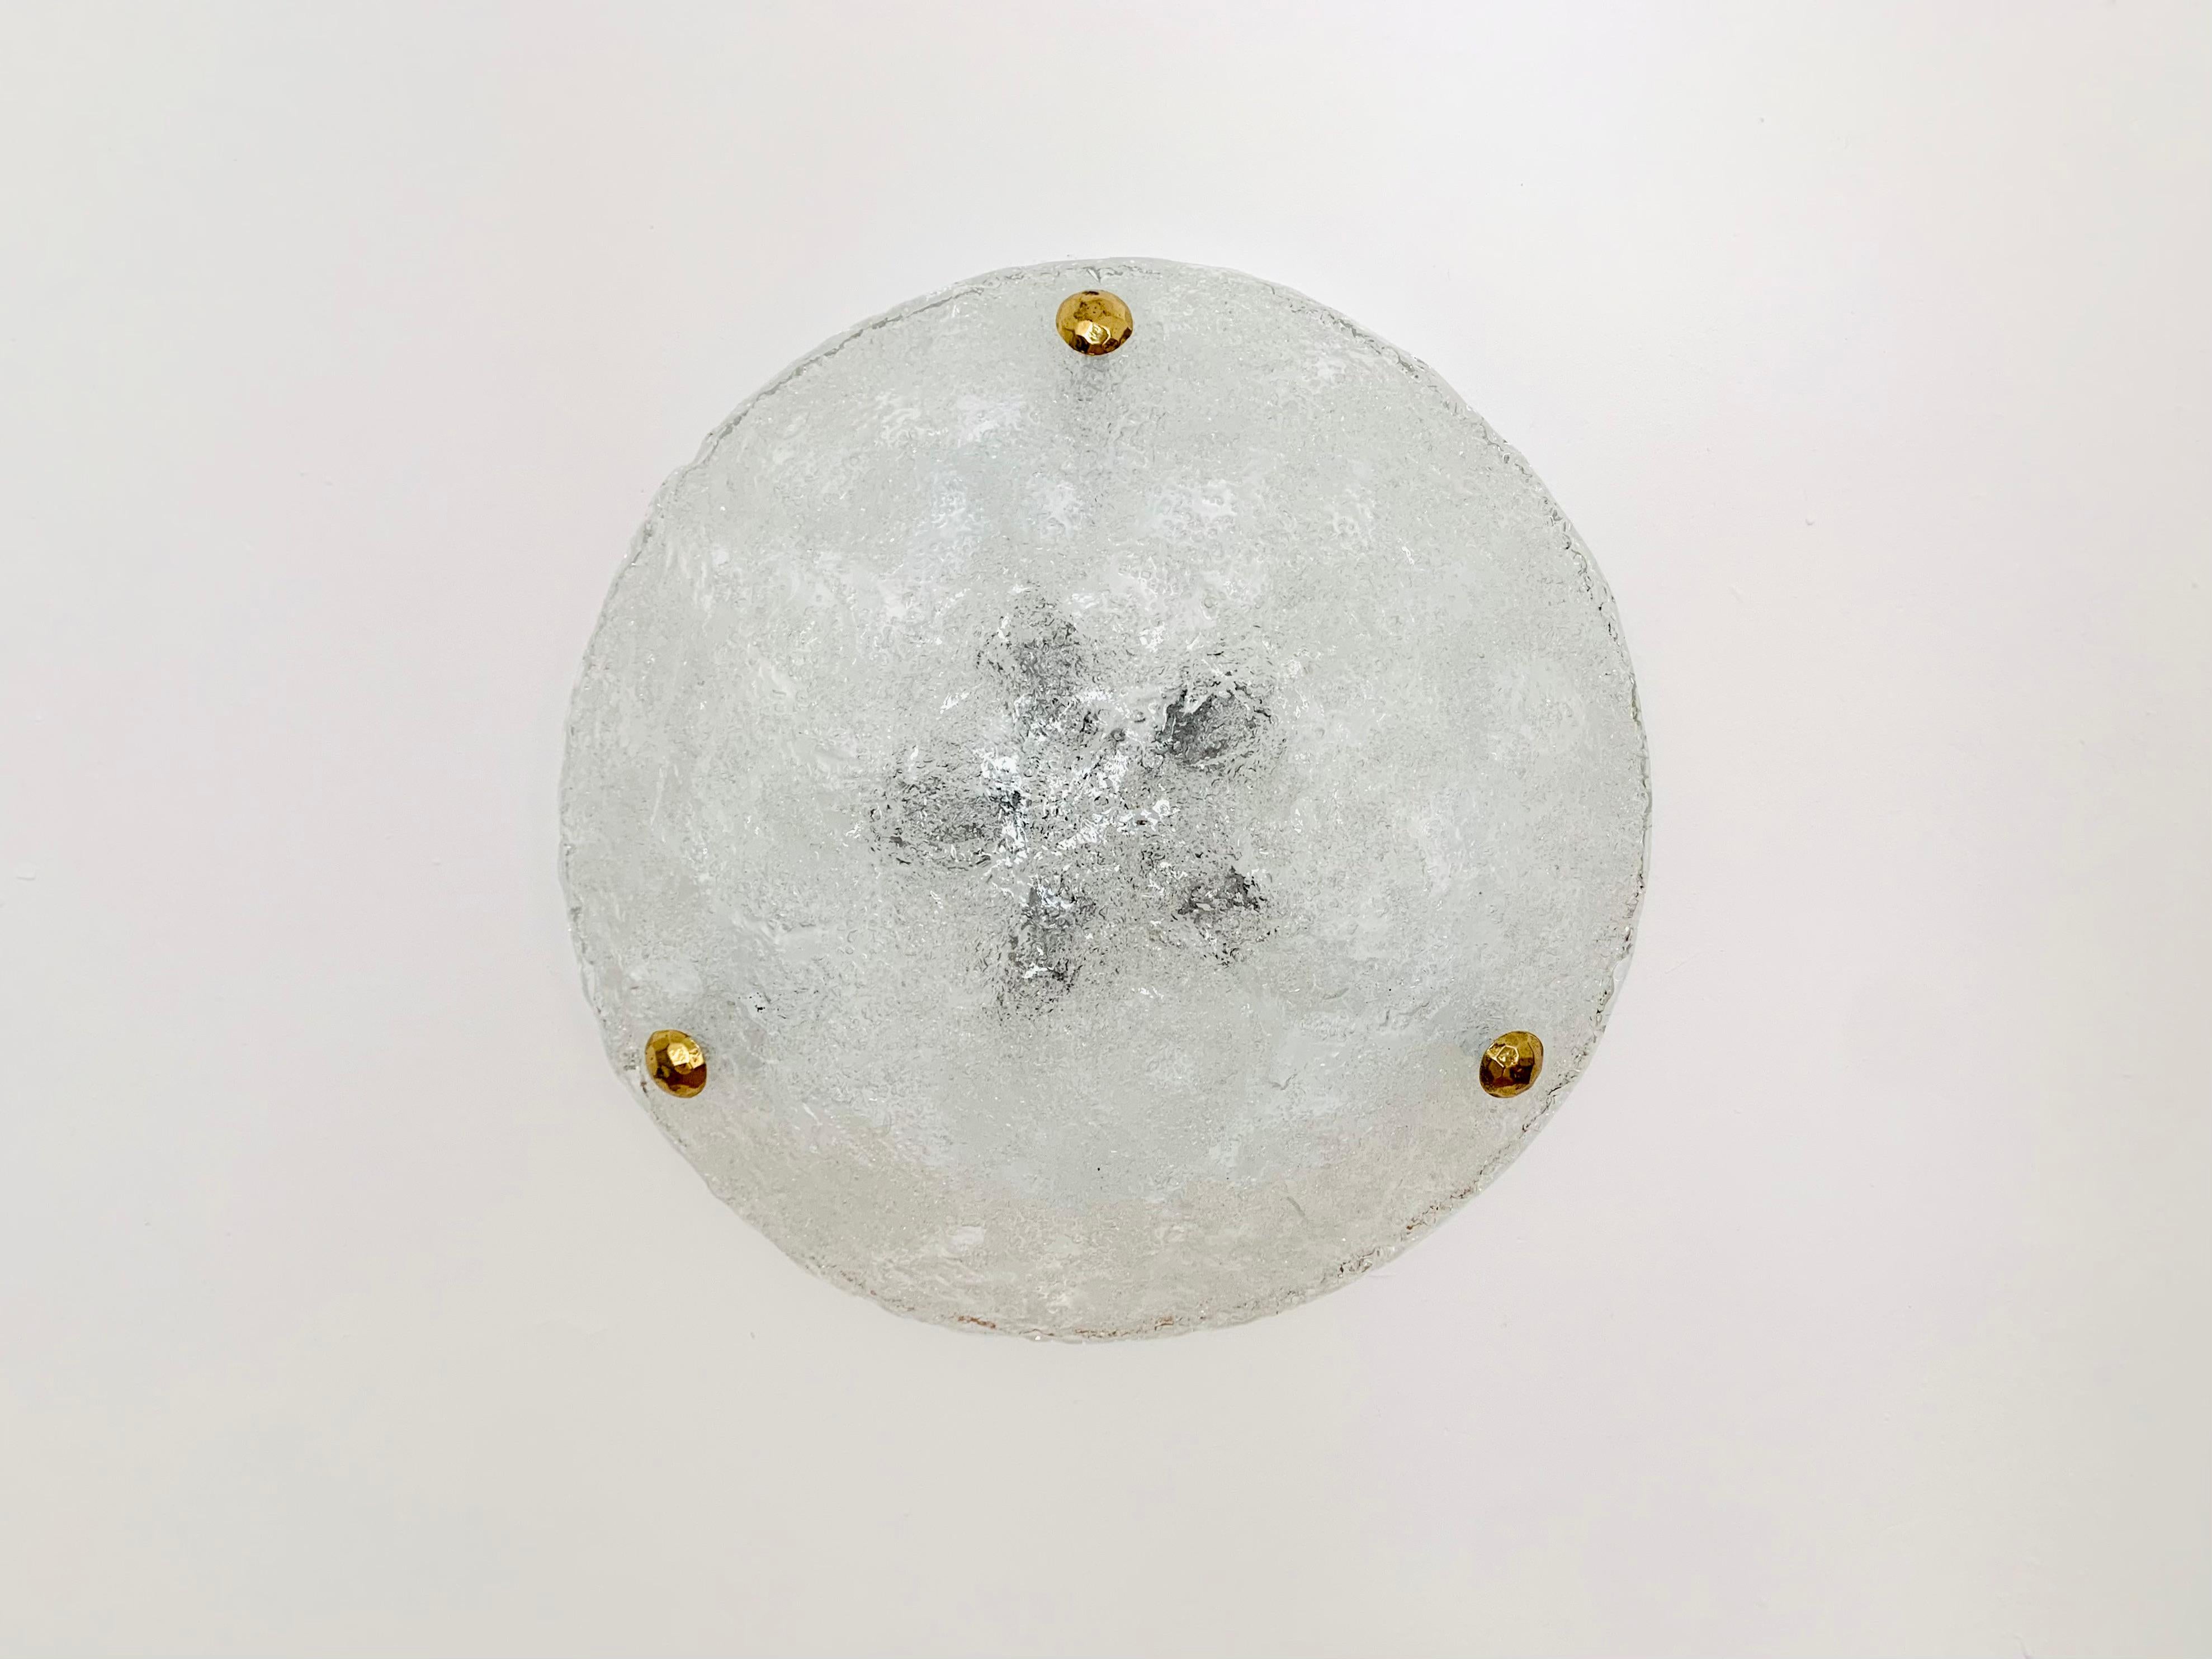 Extremely beautiful ceiling lamp from the 1960s.
Very high-quality workmanship and great design.
A sparkling light emerges.

Condition:

Very good vintage condition with slight signs of wear consistent with age.
The glass is perfectly